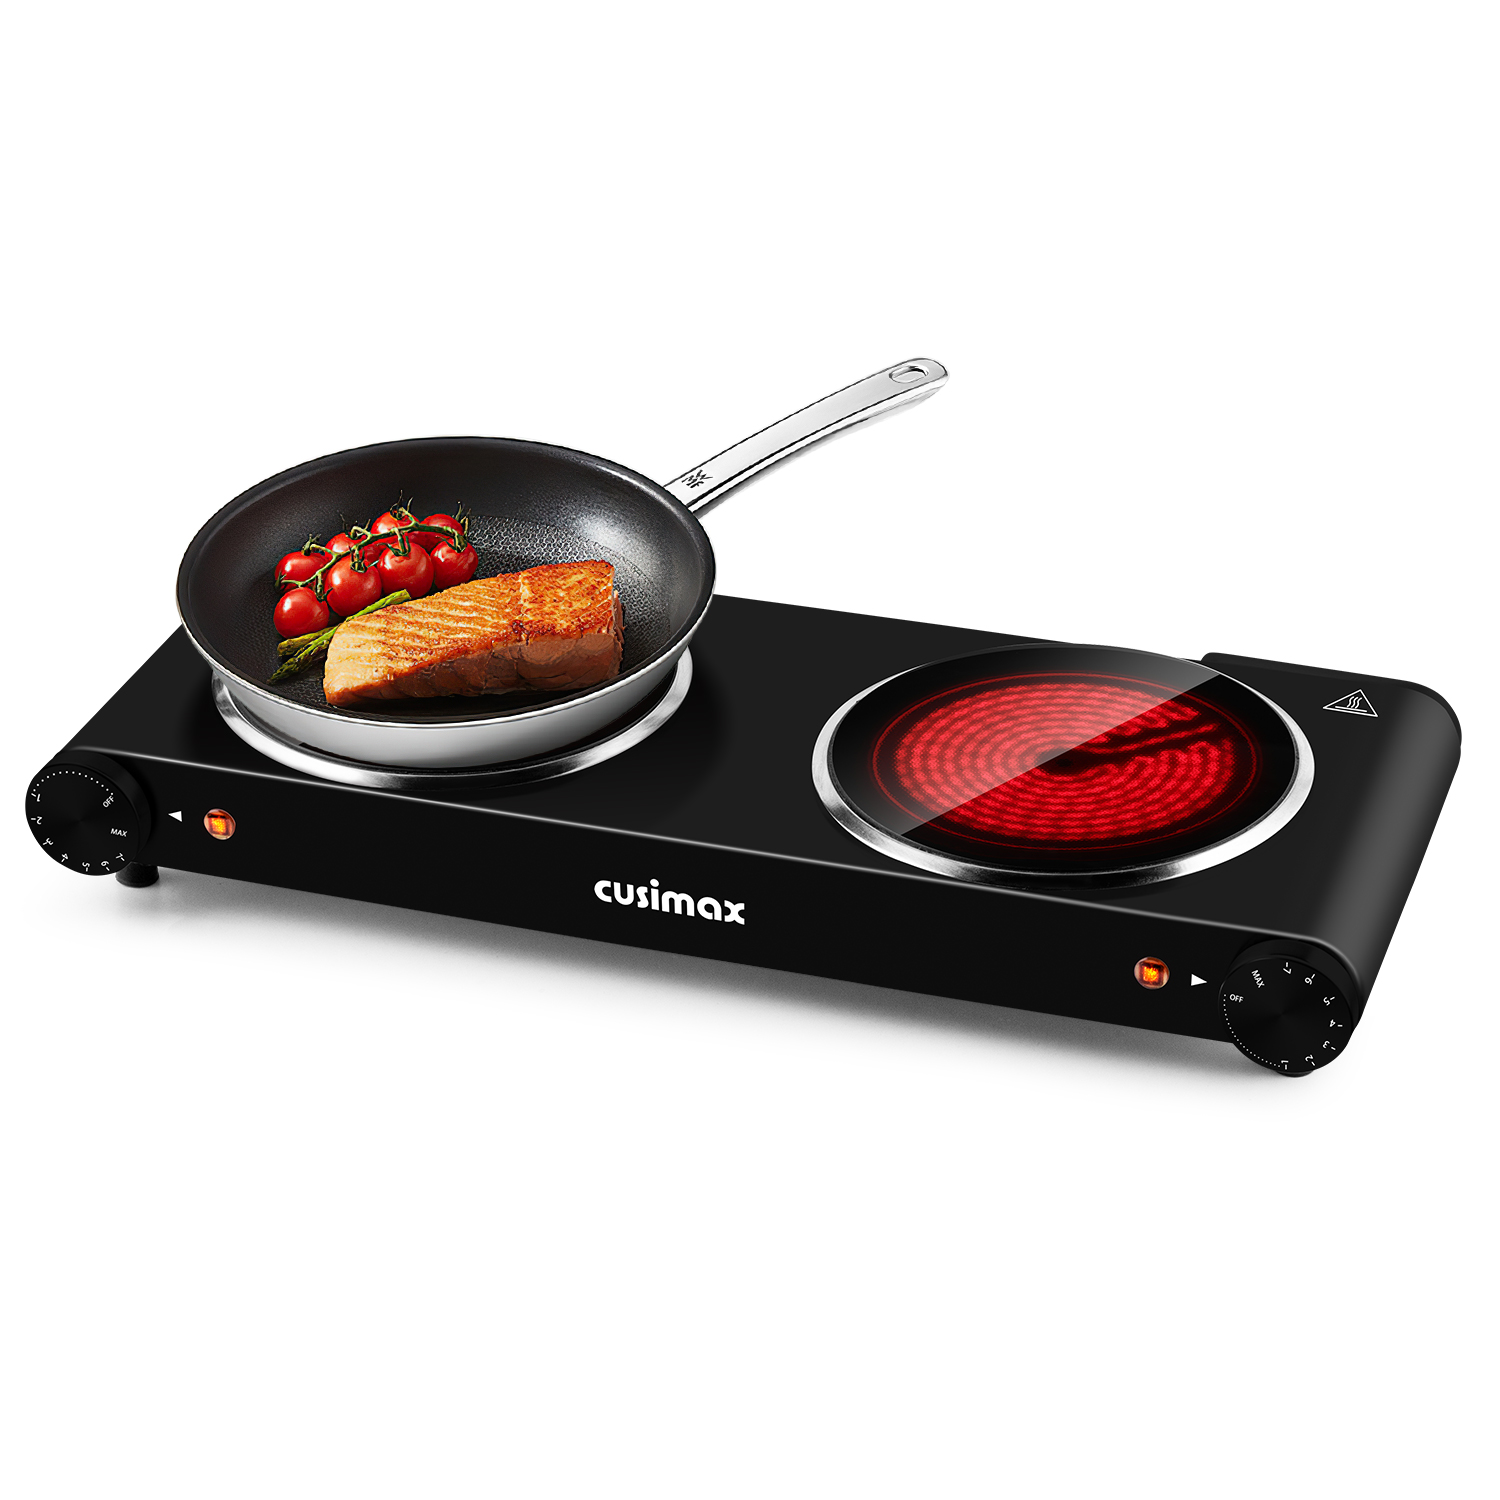 Cusimax 1800W Infrared Double Burner Electric Stove(FR)